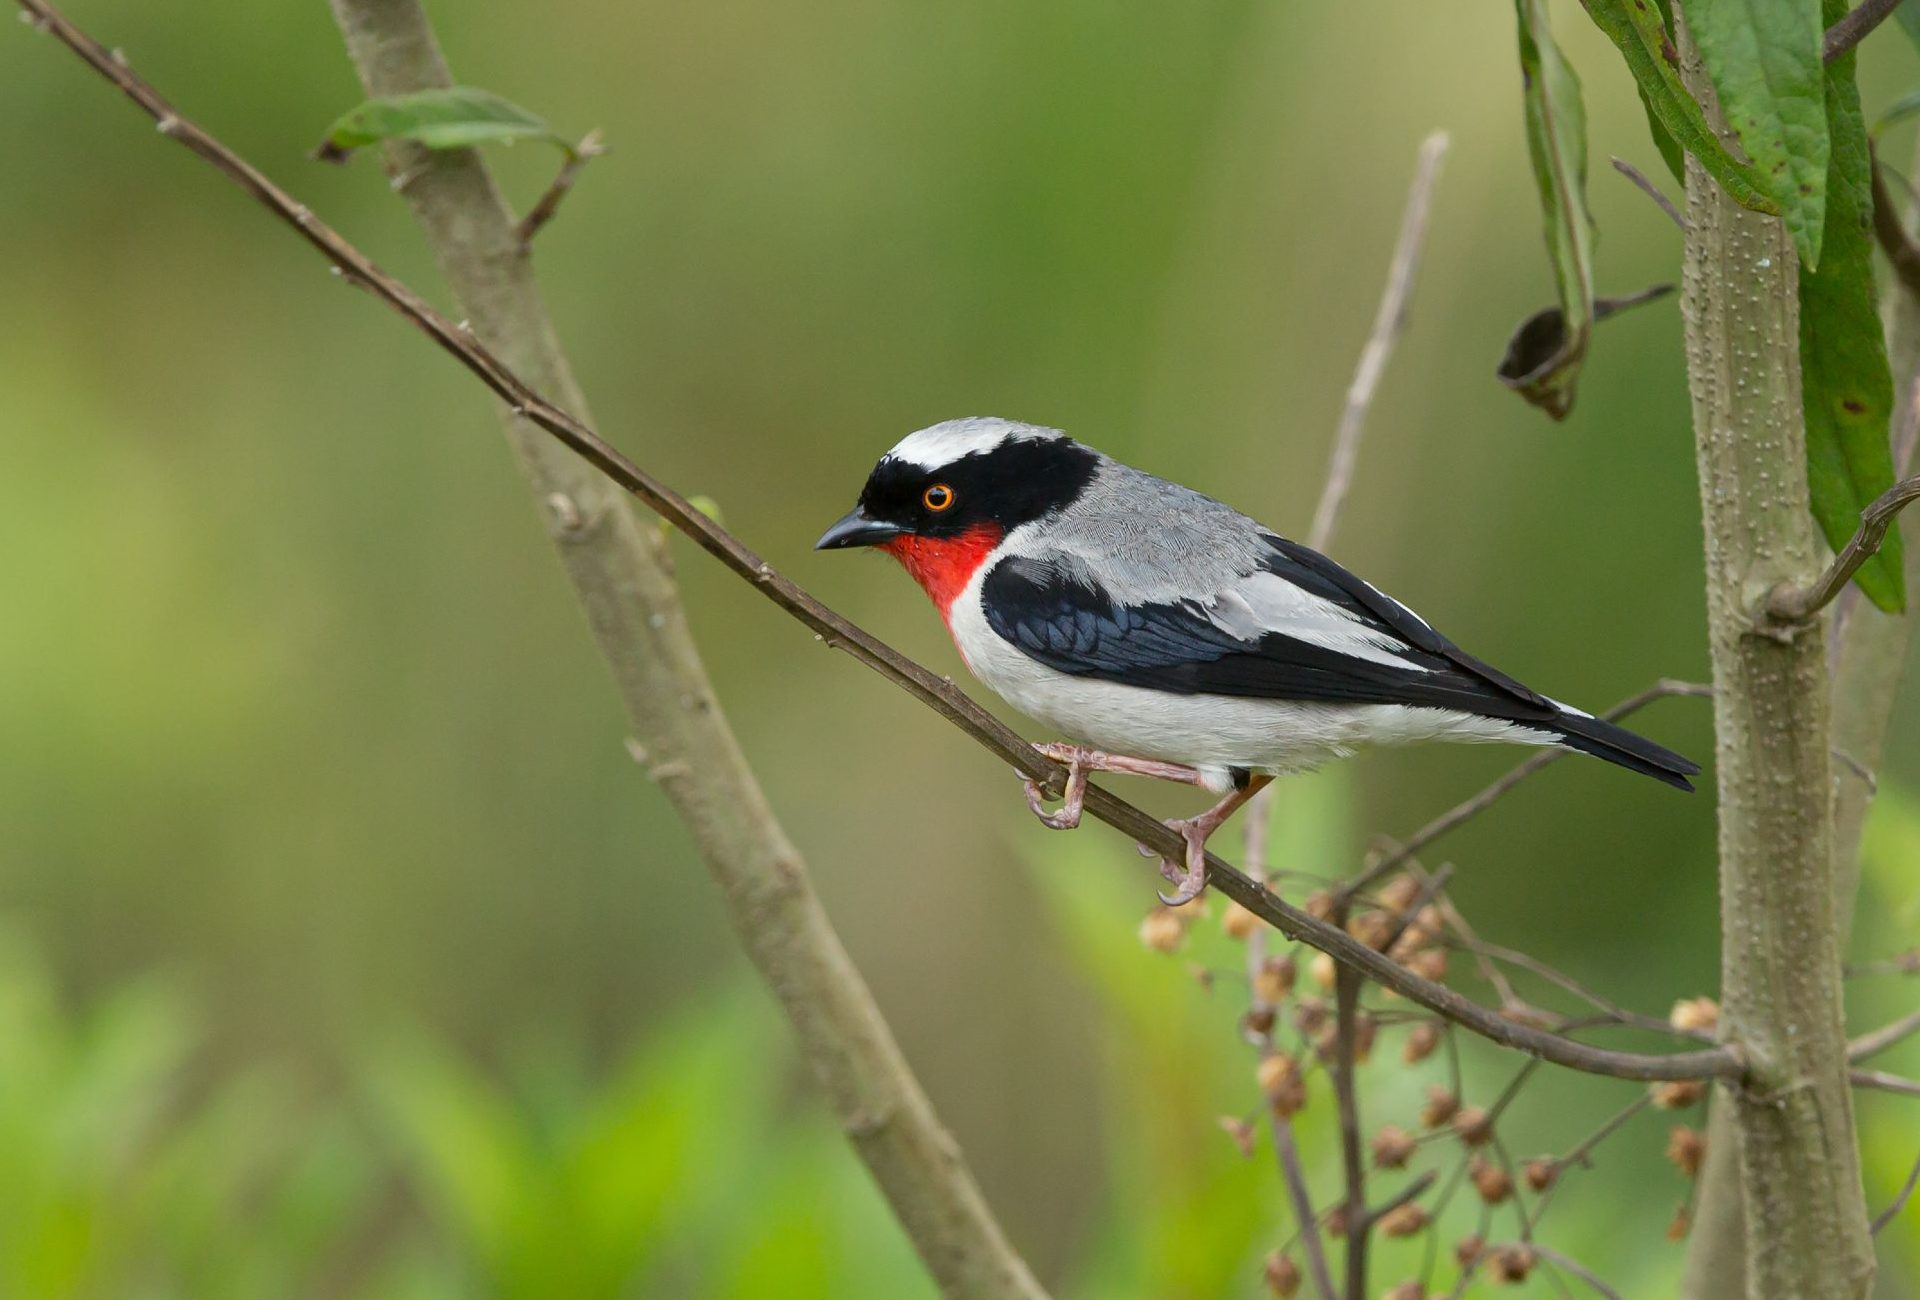 Cherry-throated Tanager